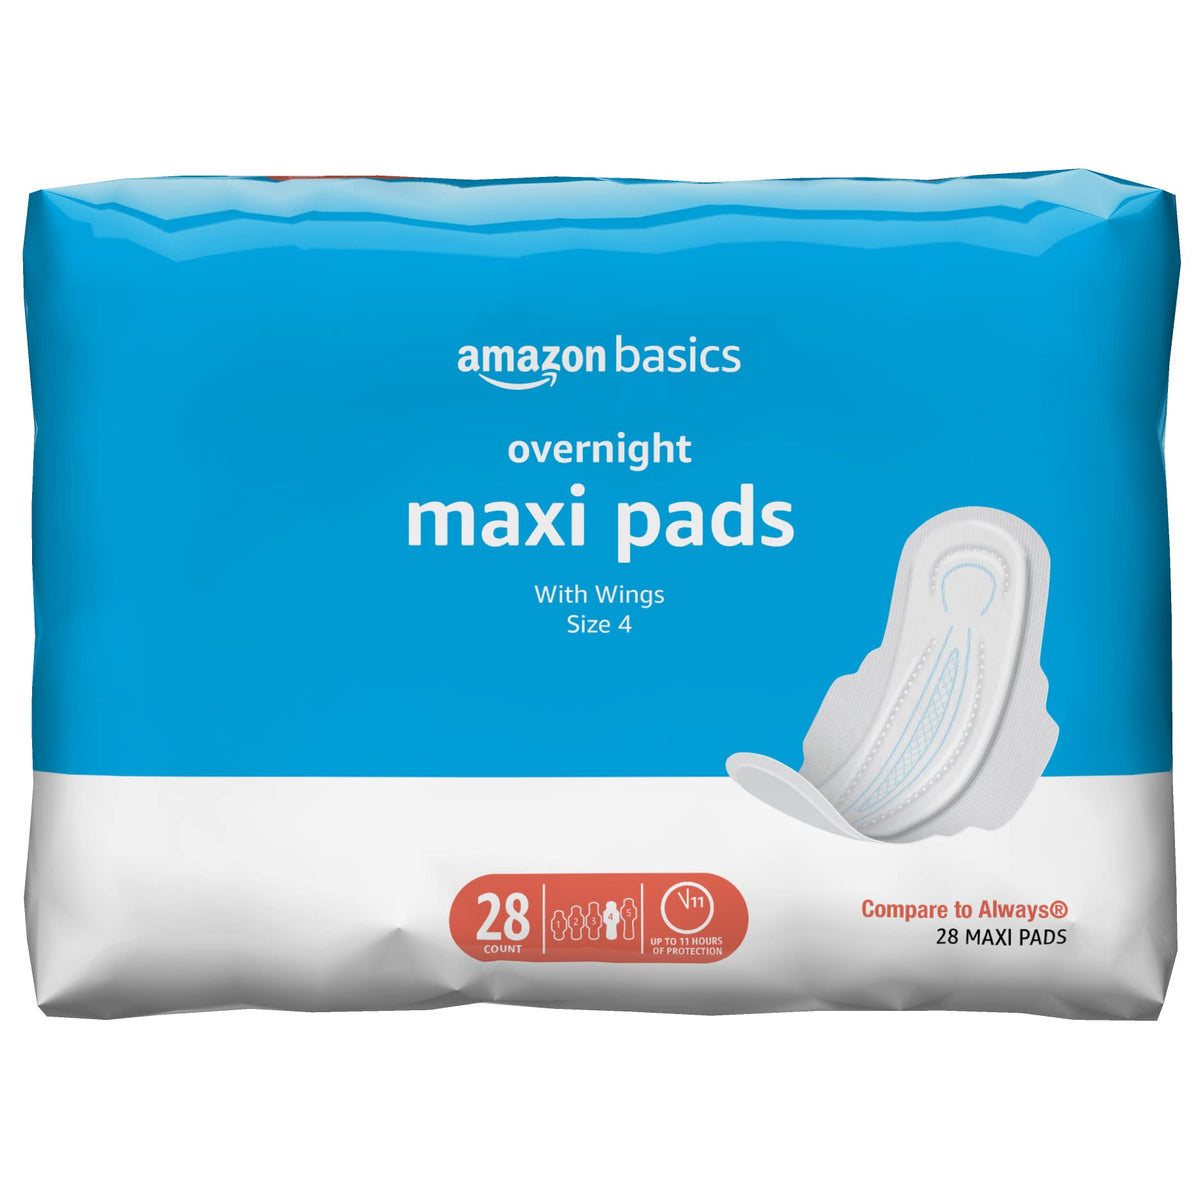 Amazon Basics Thick Maxi Pads with Flexi-Wings for Periods, Overnight Absorbency, Unscented, Size 4, 28 Count, 1 Pack (Previously Solimo)